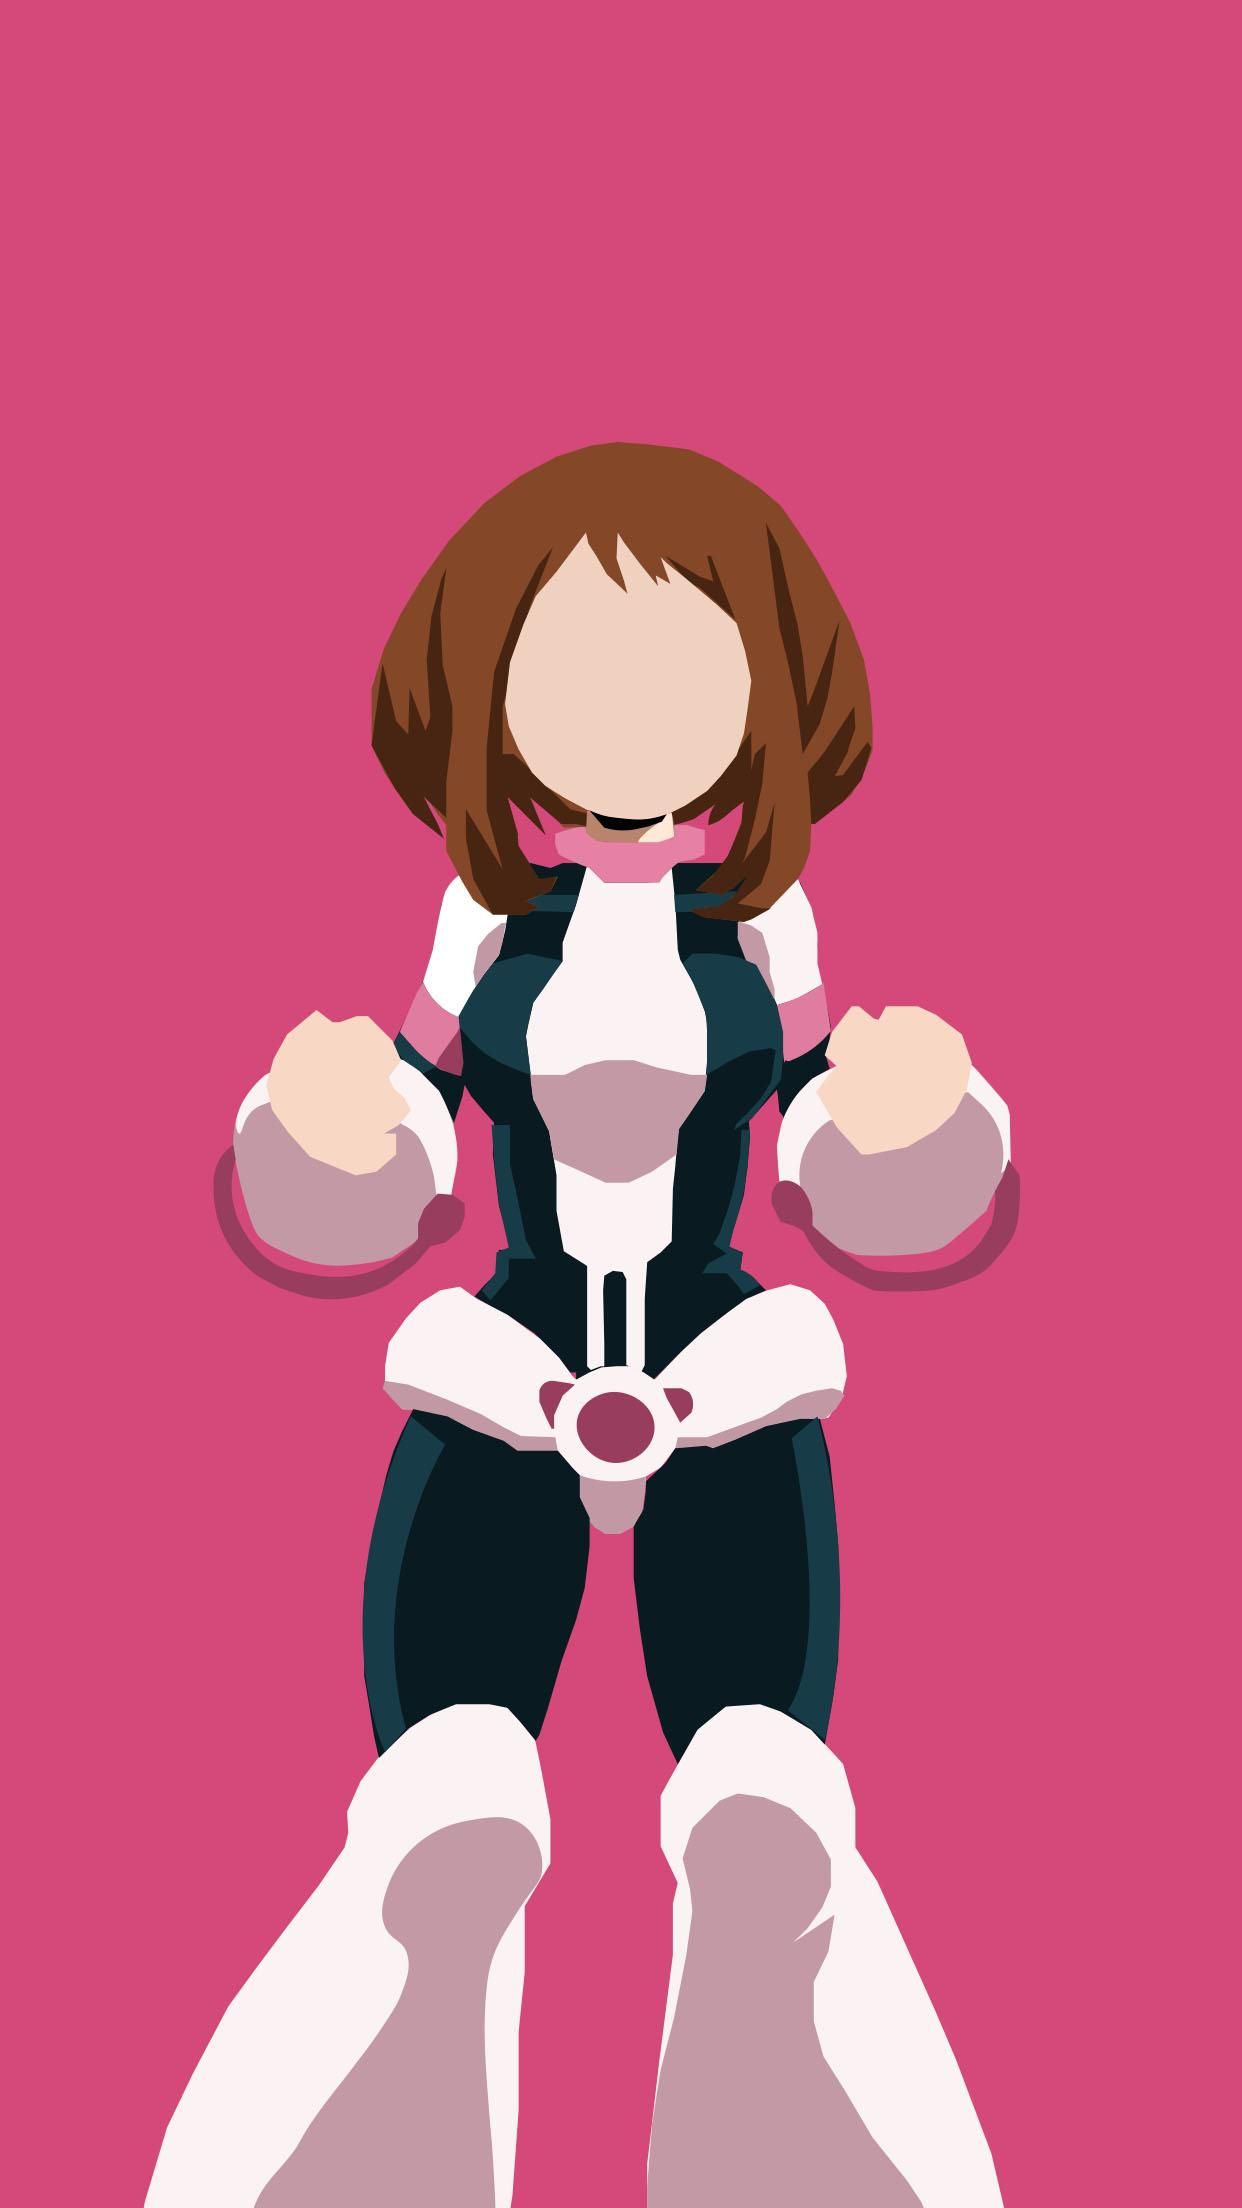 Uravity Phone Wallpapers On Wallpaperdog See more ideas about aesthetic, pink aesthetic, pastel aesthetic. uravity phone wallpapers on wallpaperdog